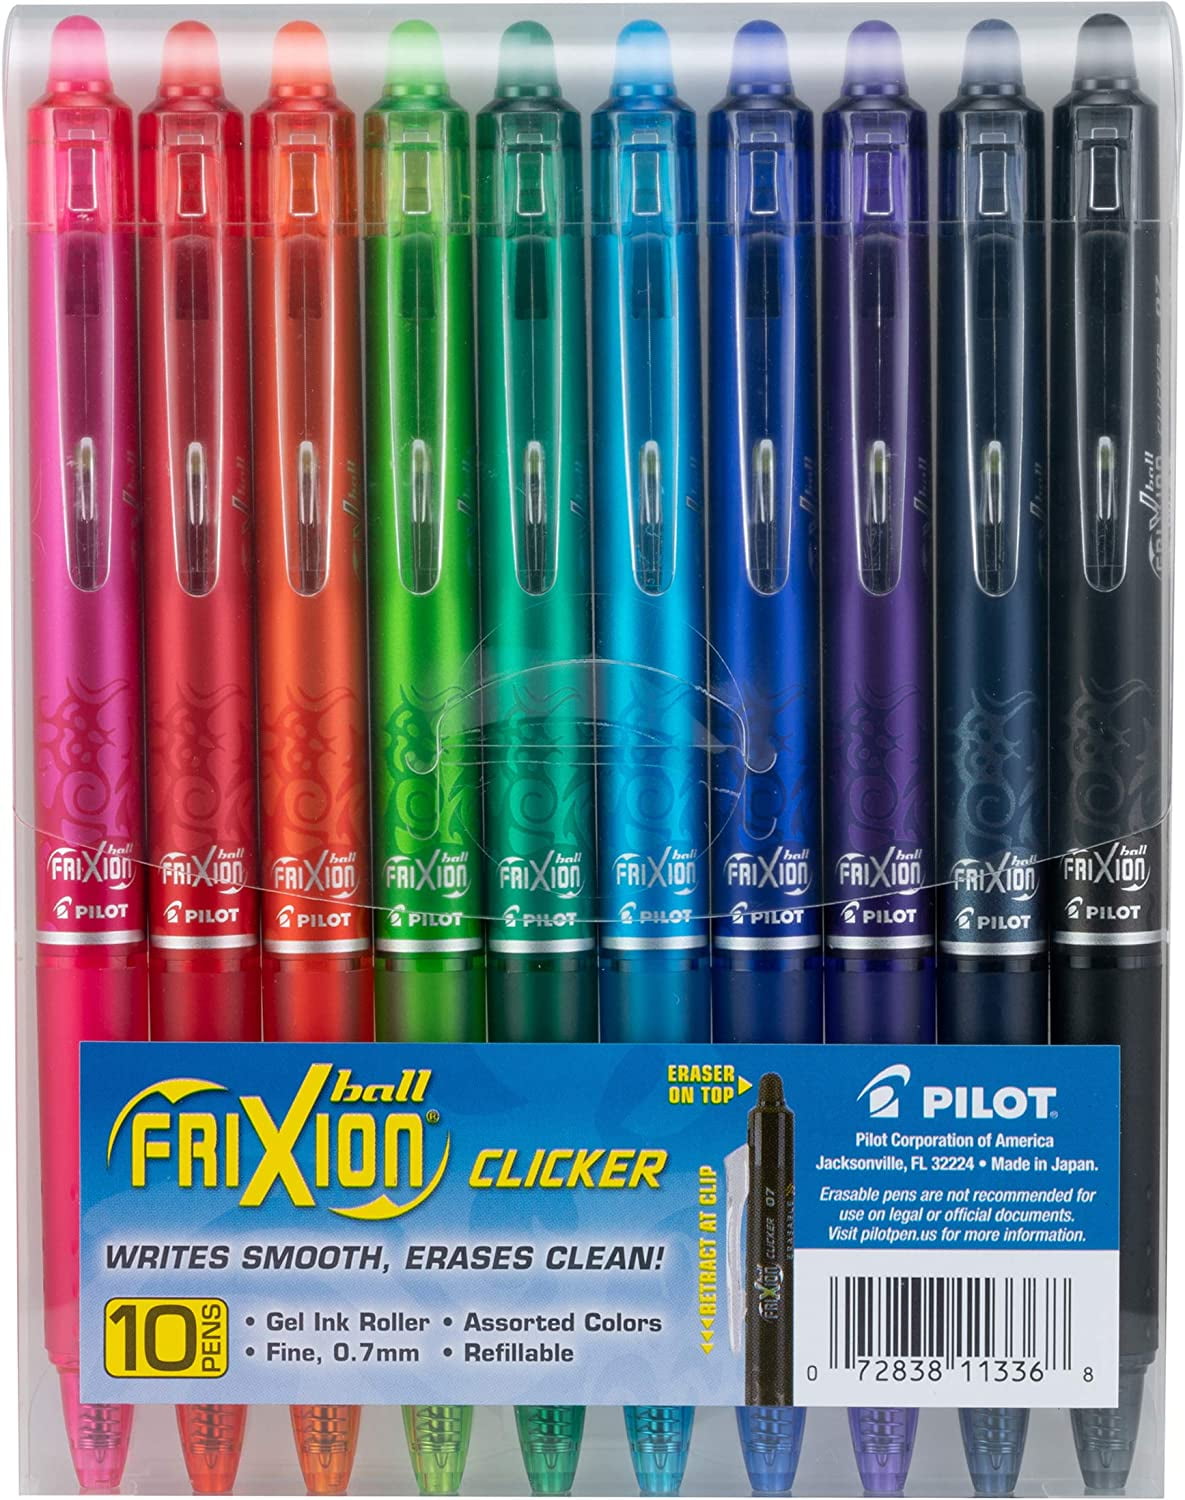 Pilot FriXion Clicker Erasable, Refillable & Retractable Gel Ink Pens, Fine Point, Assorted Color Inks, 10-Pack Pouch (11336)